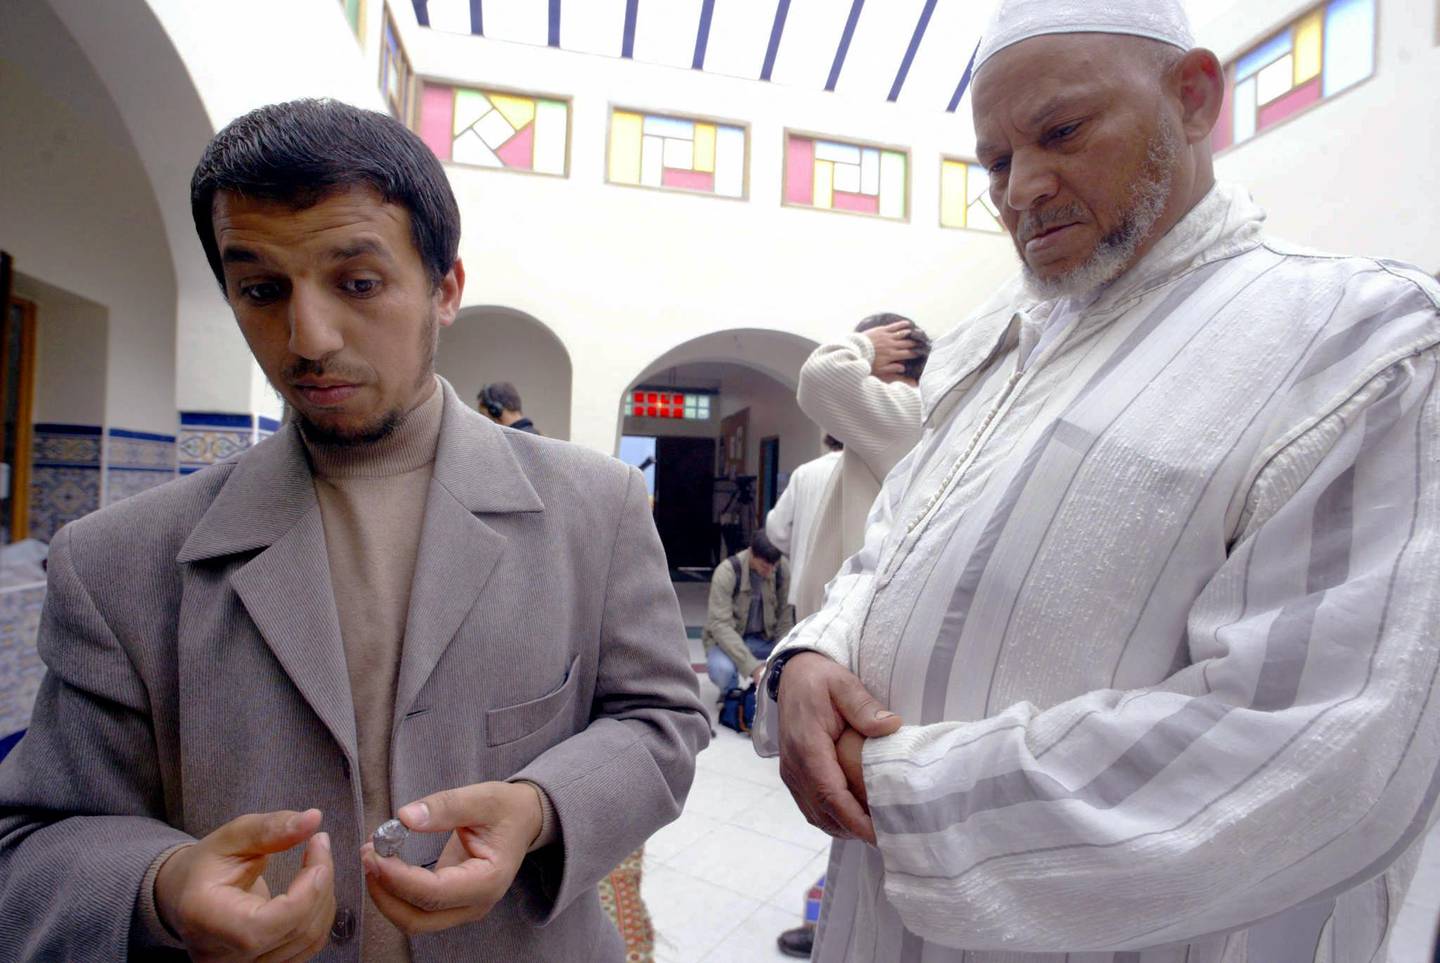 Imam Hassan Iquioussen, left, who French authorities want expelled. AFP